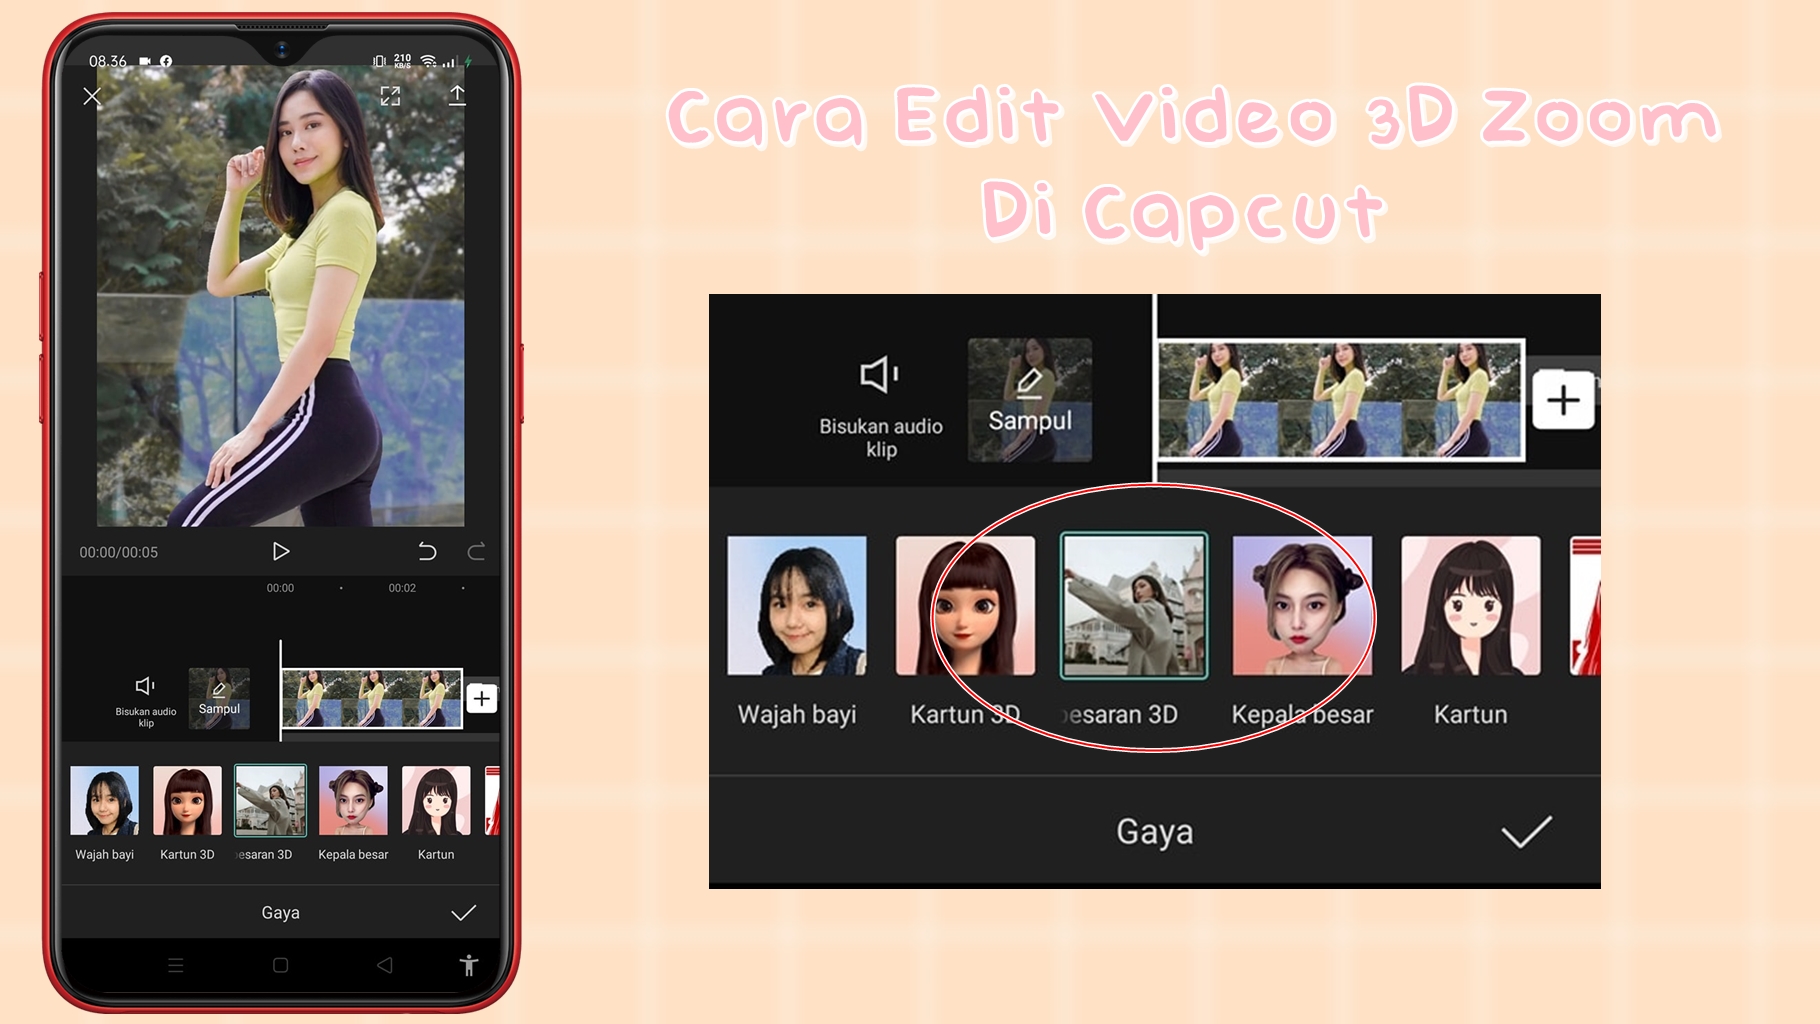 How to recover deleted videos from capcut